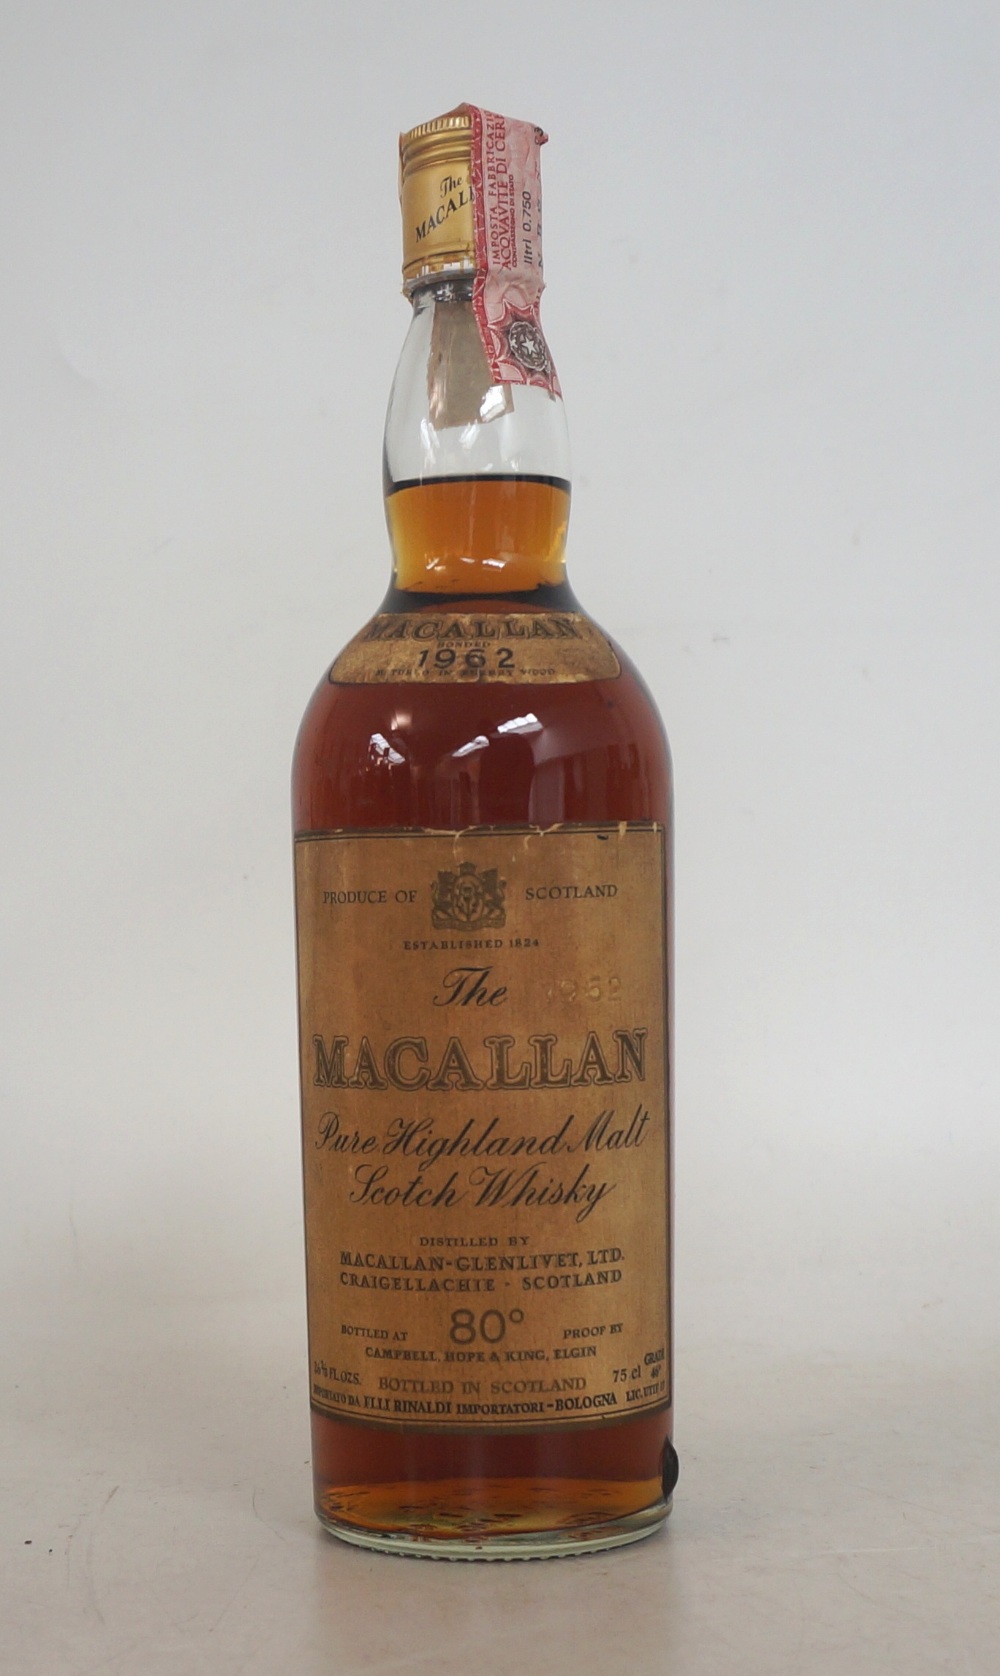 THE MACALLAN 1962 - 80 PROOF
Bottled at 80 degrees proof by Campbell, Hope & King, Elgin.